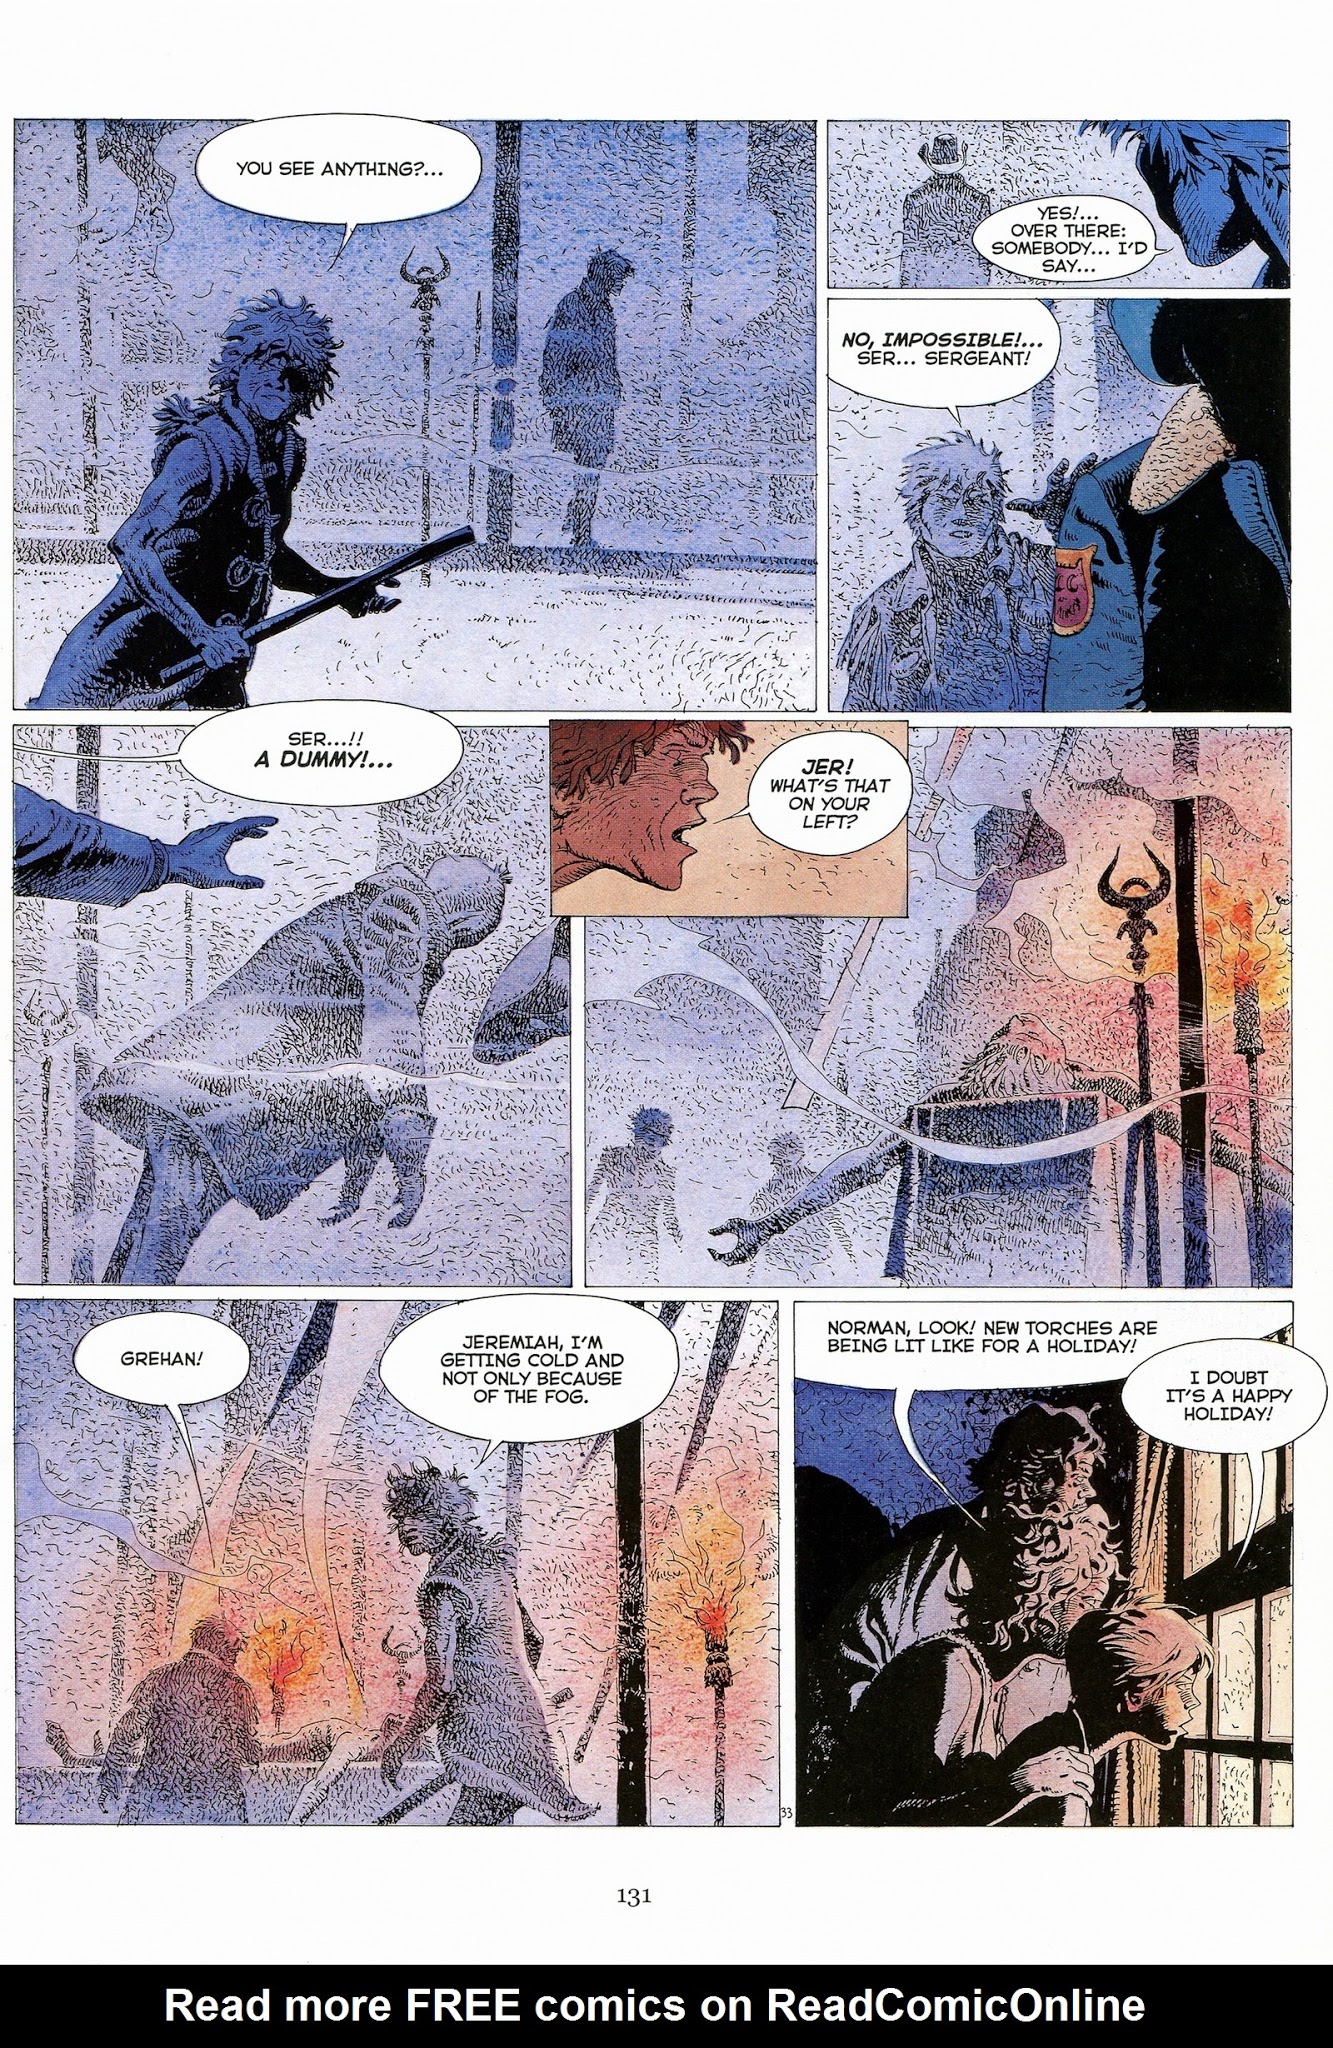 Read online Jeremiah by Hermann comic -  Issue # TPB 2 - 132